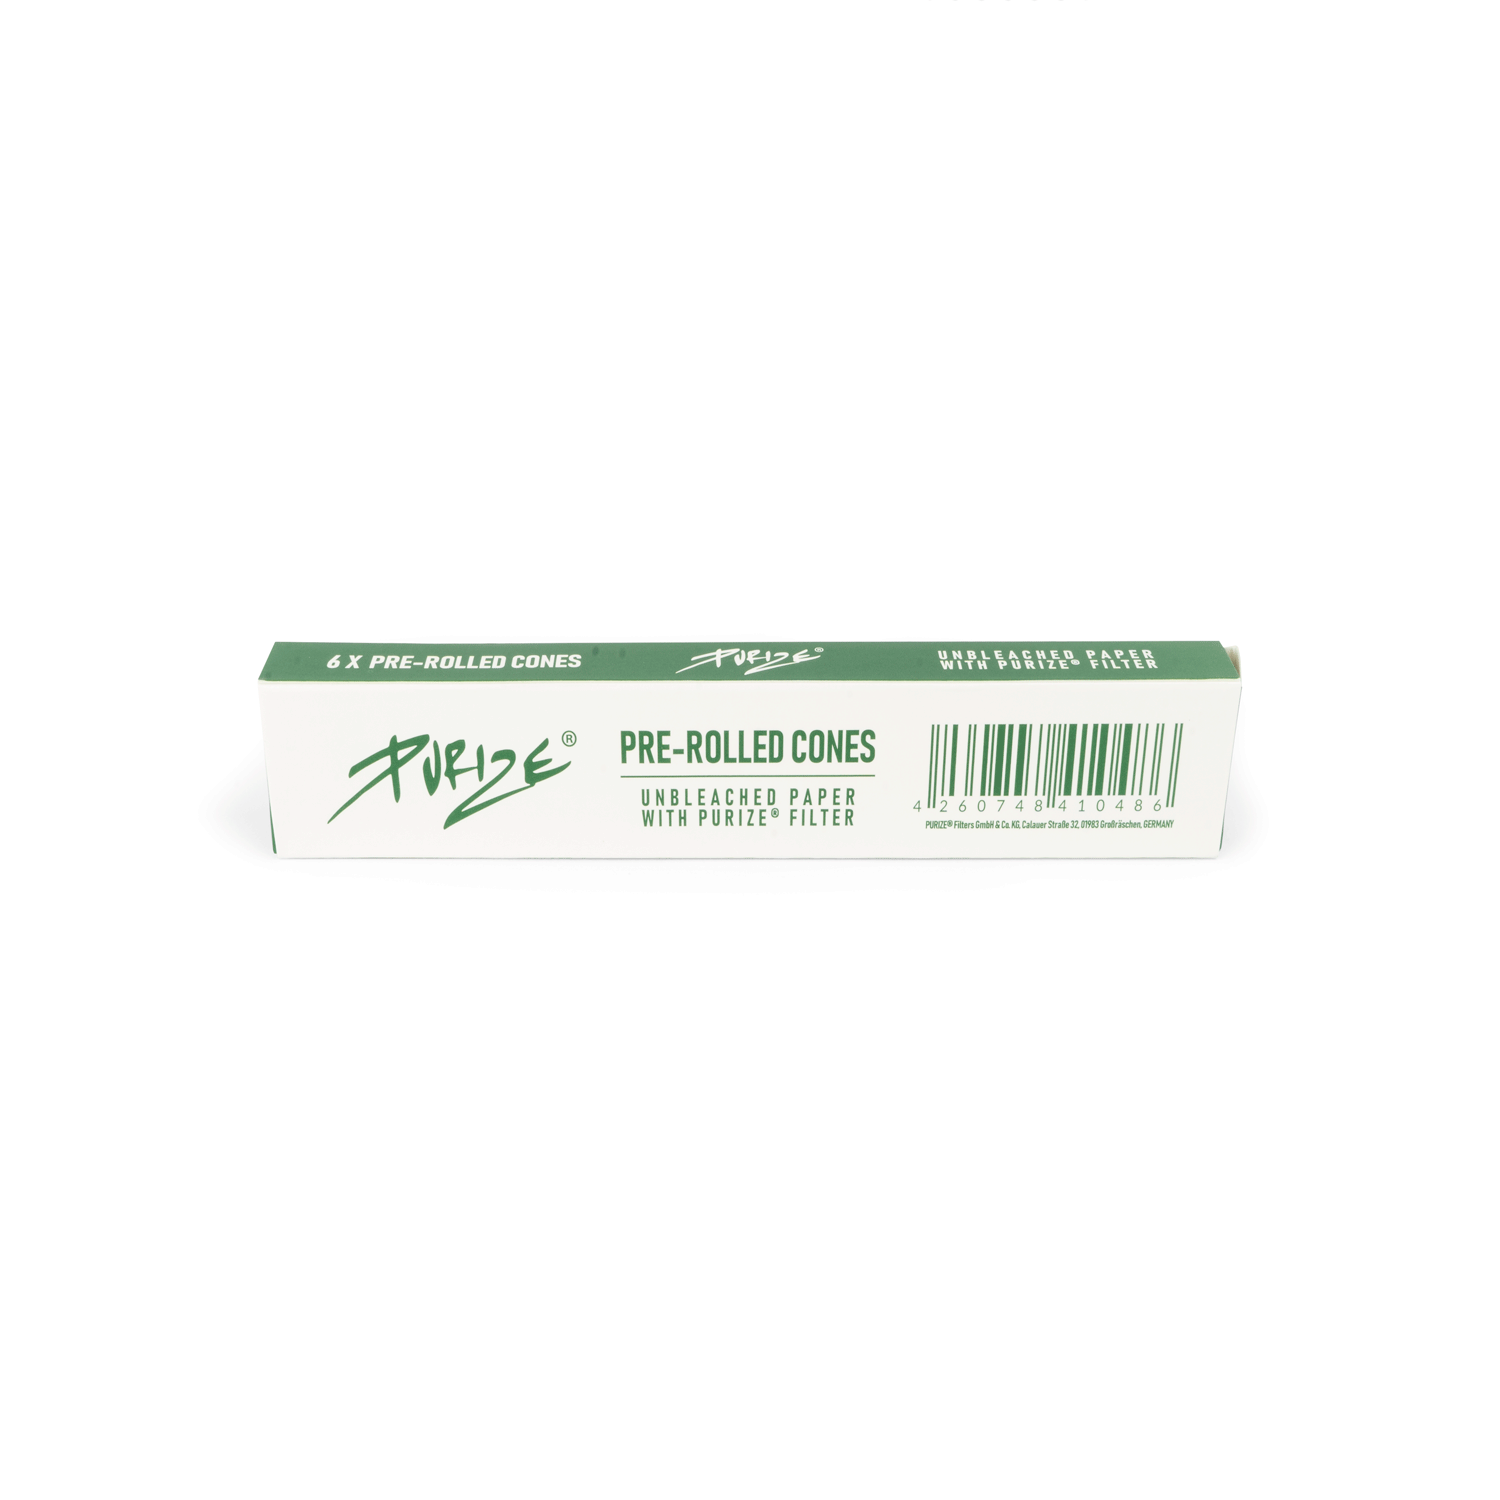 PURIZE®  Pre-Rolled Cones